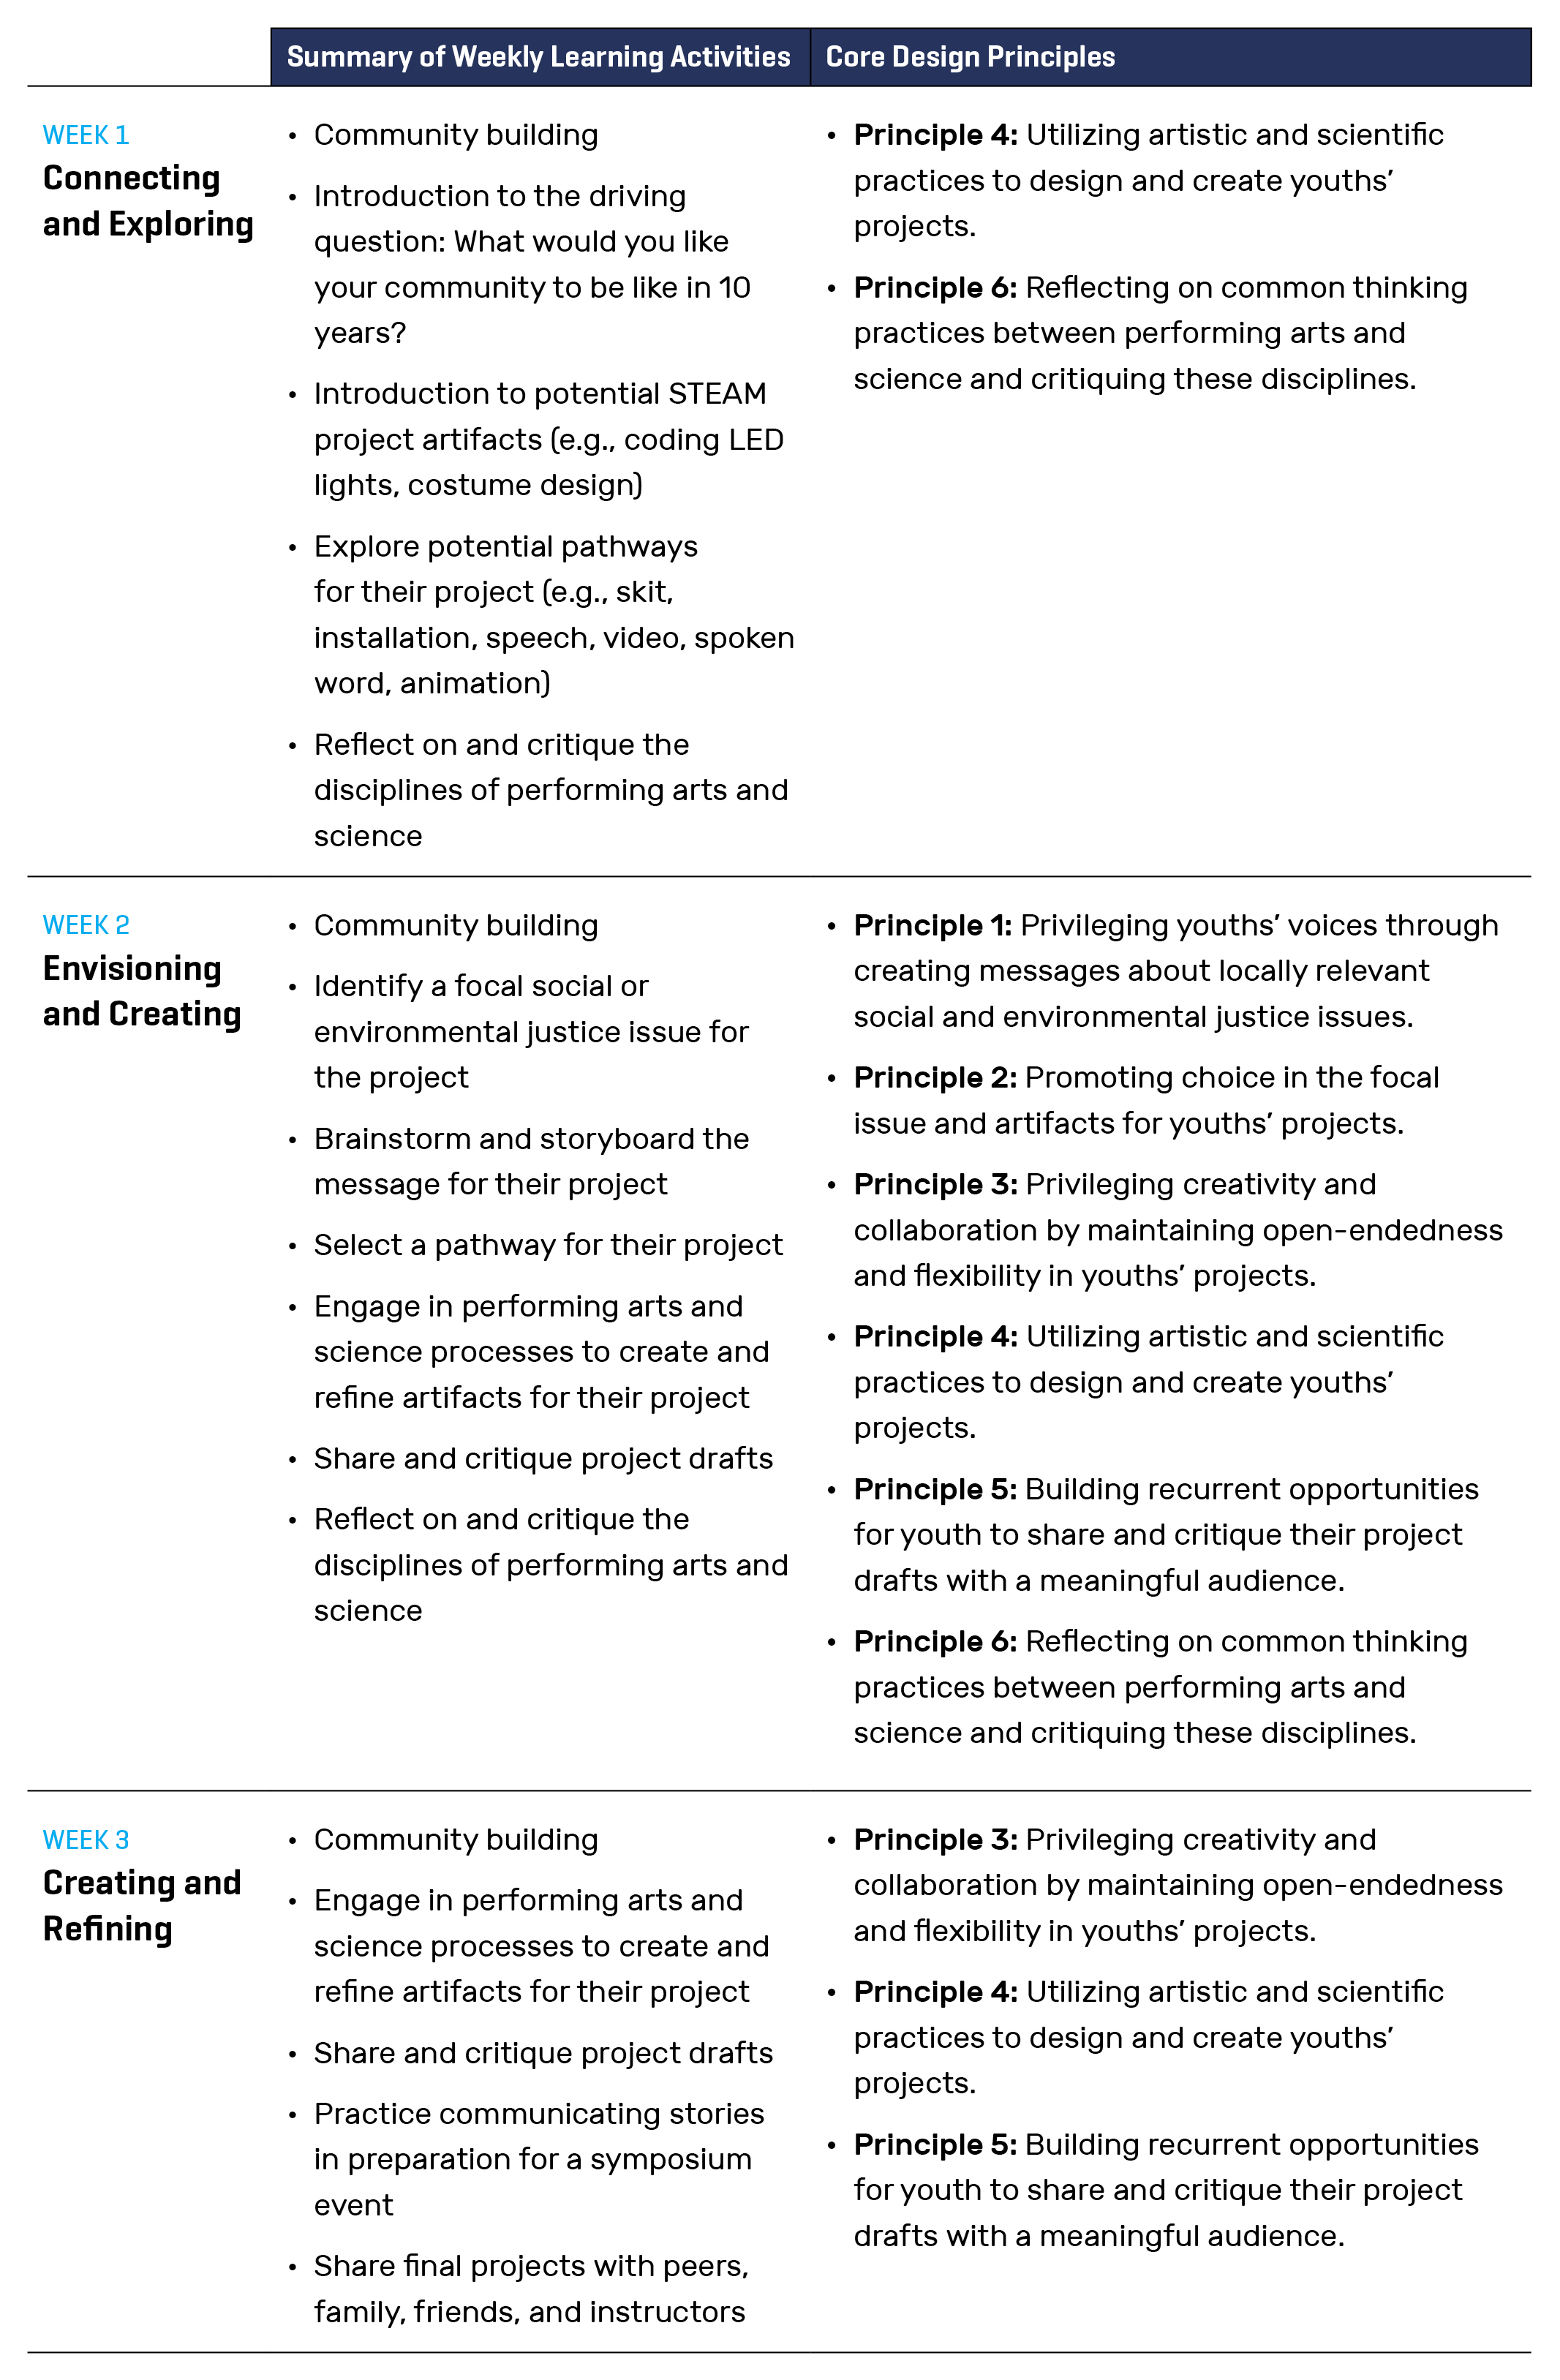 This table shows a Summary of Weekly Learning Activities and Corresponding Design Principles